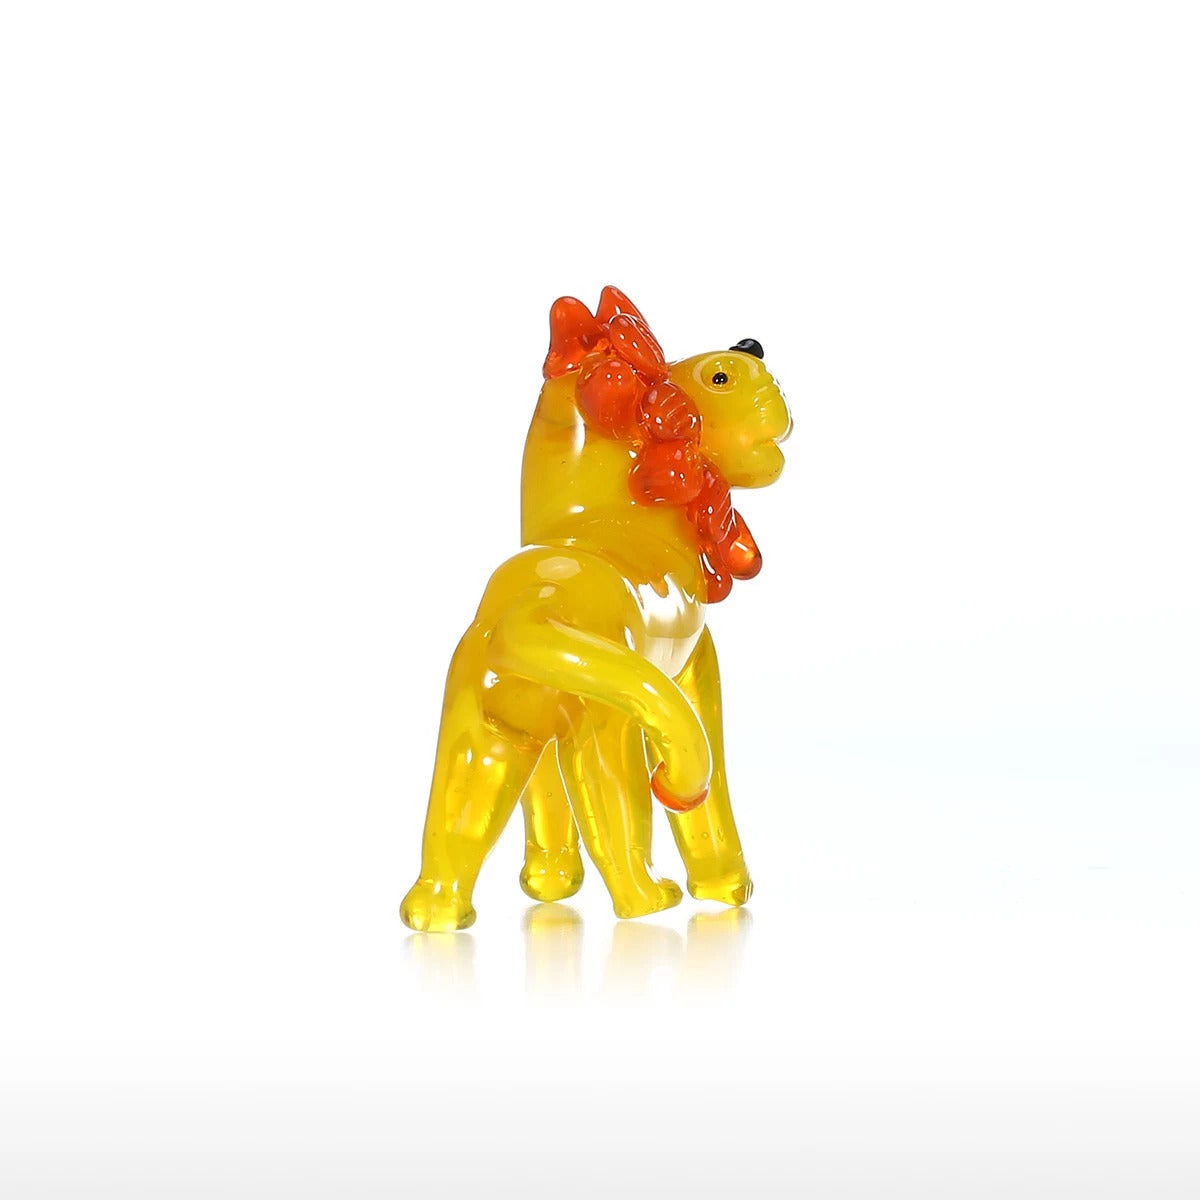 Blown Glass Ornaments with Lion Glass Figurines